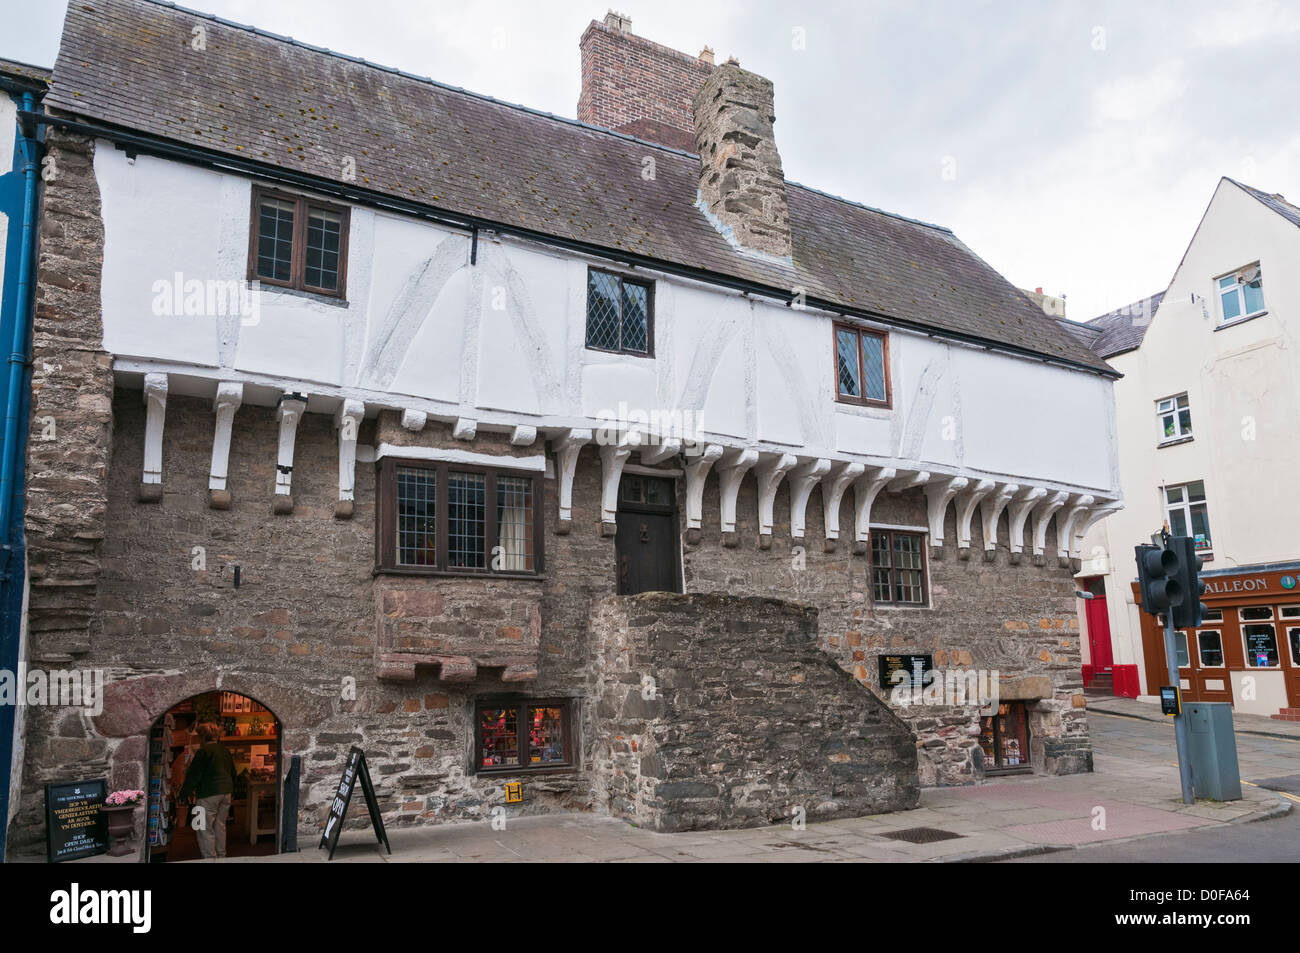 Wales, Conwy, Aberconwy House, älteste Haus in Conwy, ca. 1300 gebaut Stockfoto